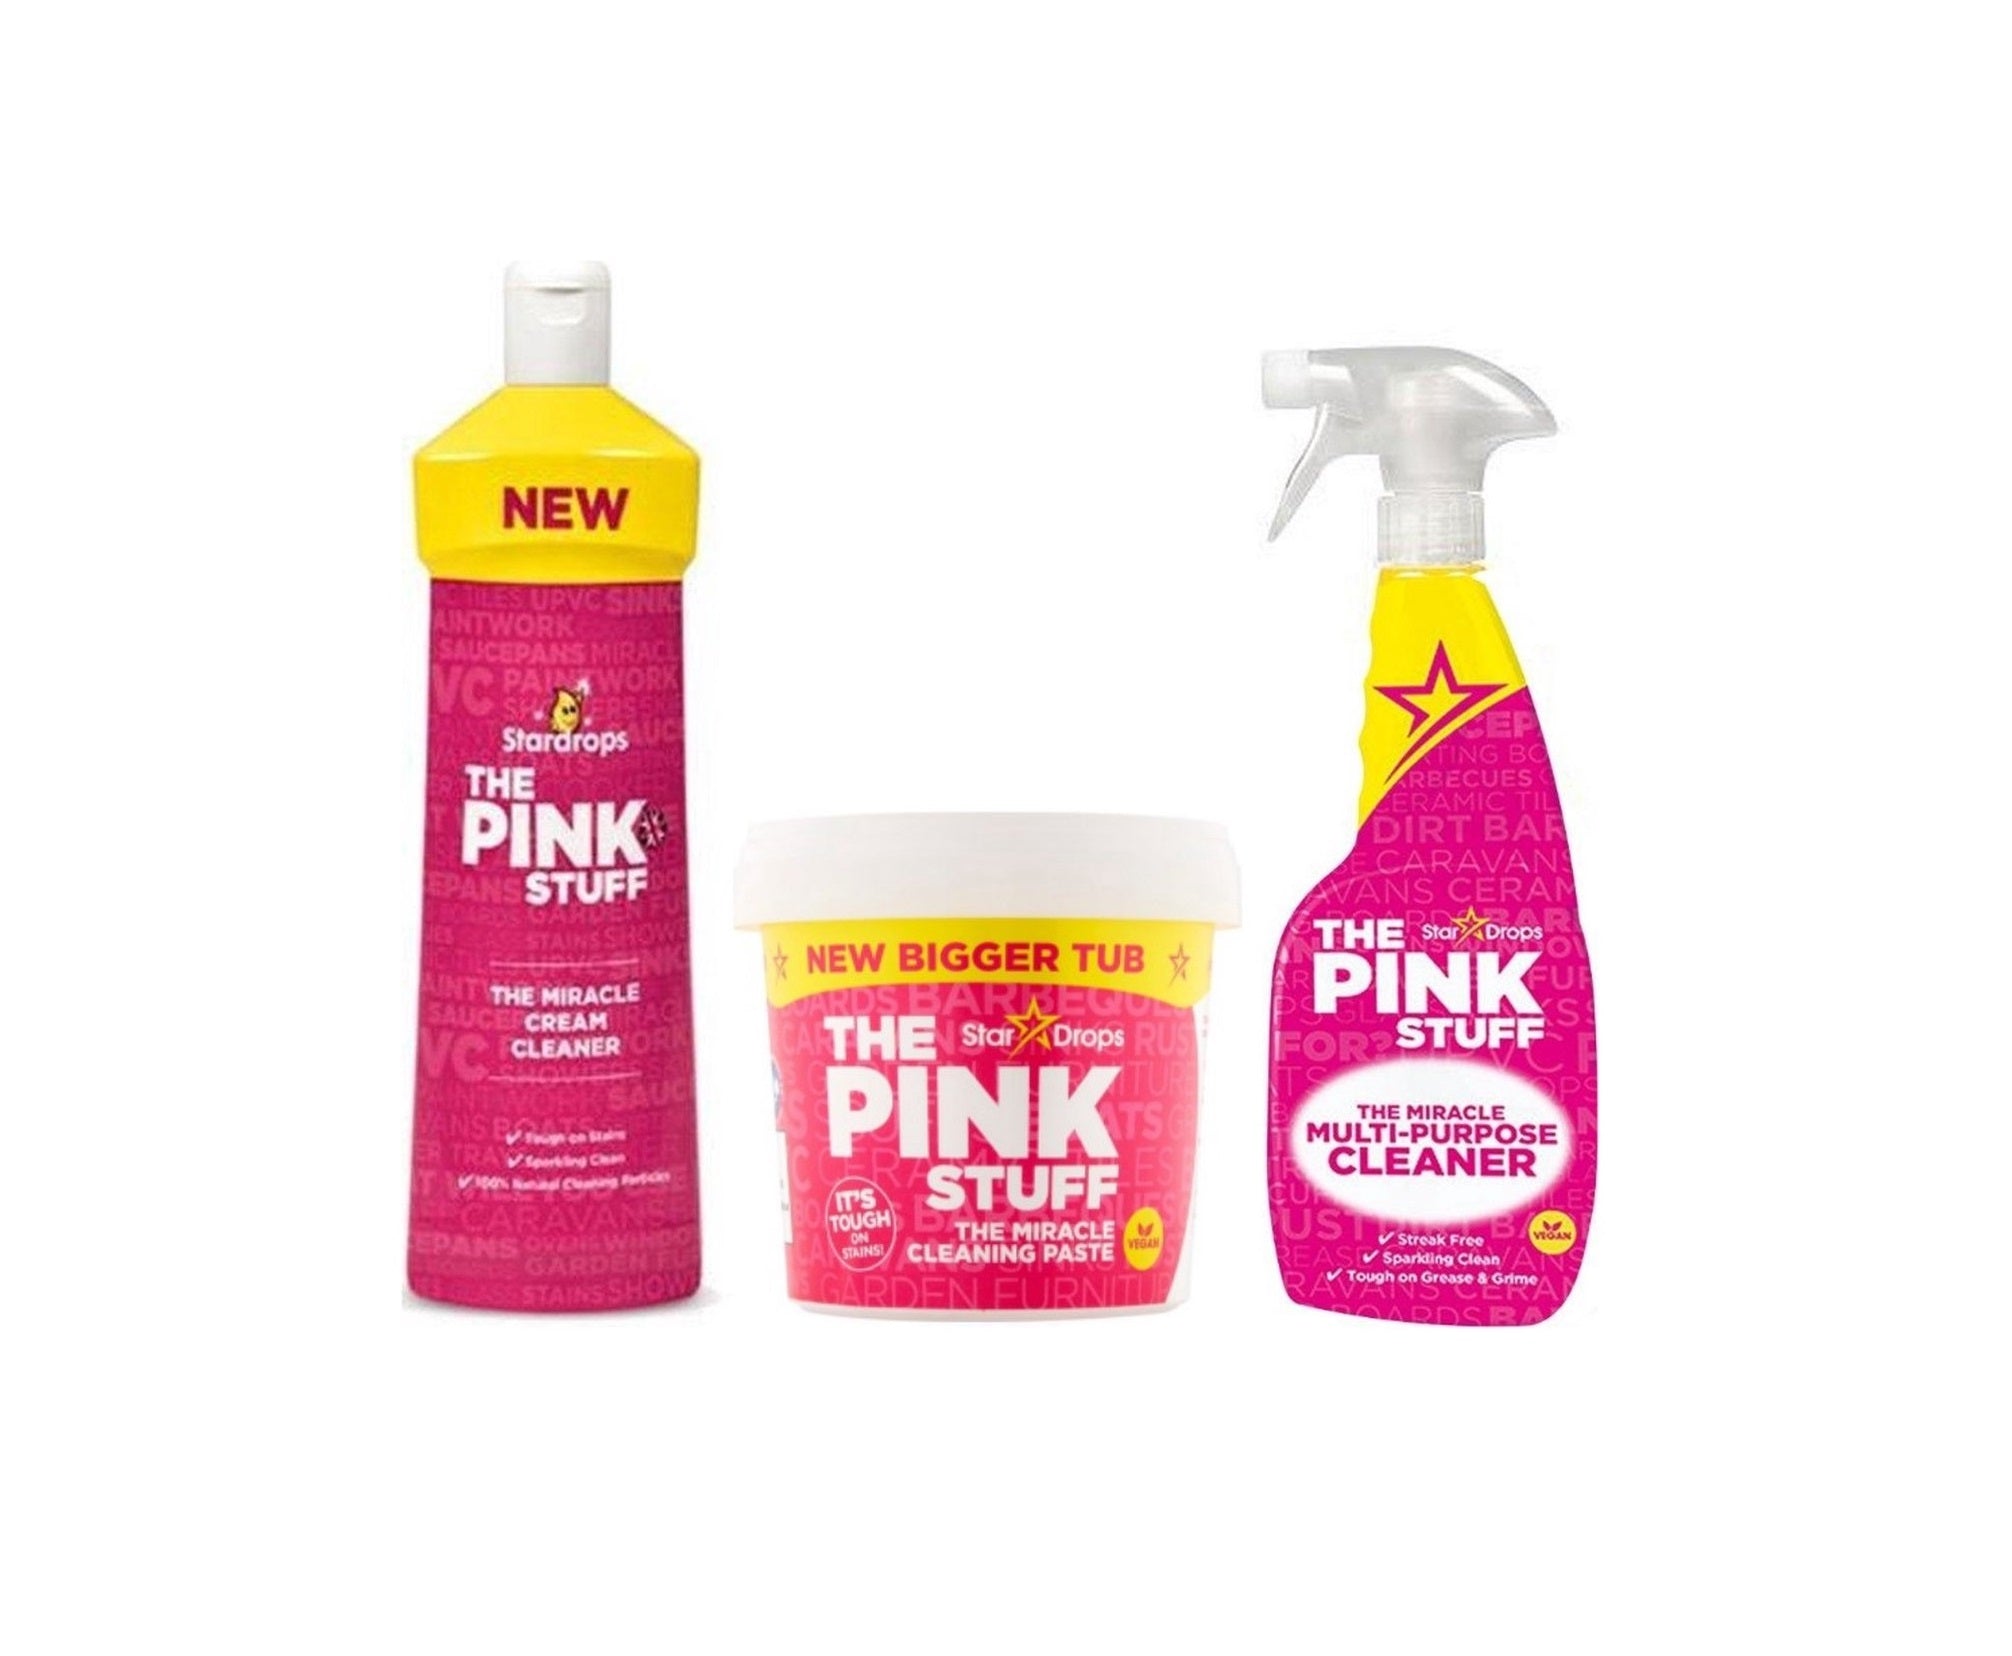  Stardrops - The Pink Stuff - The Miracle Multi-Purpose